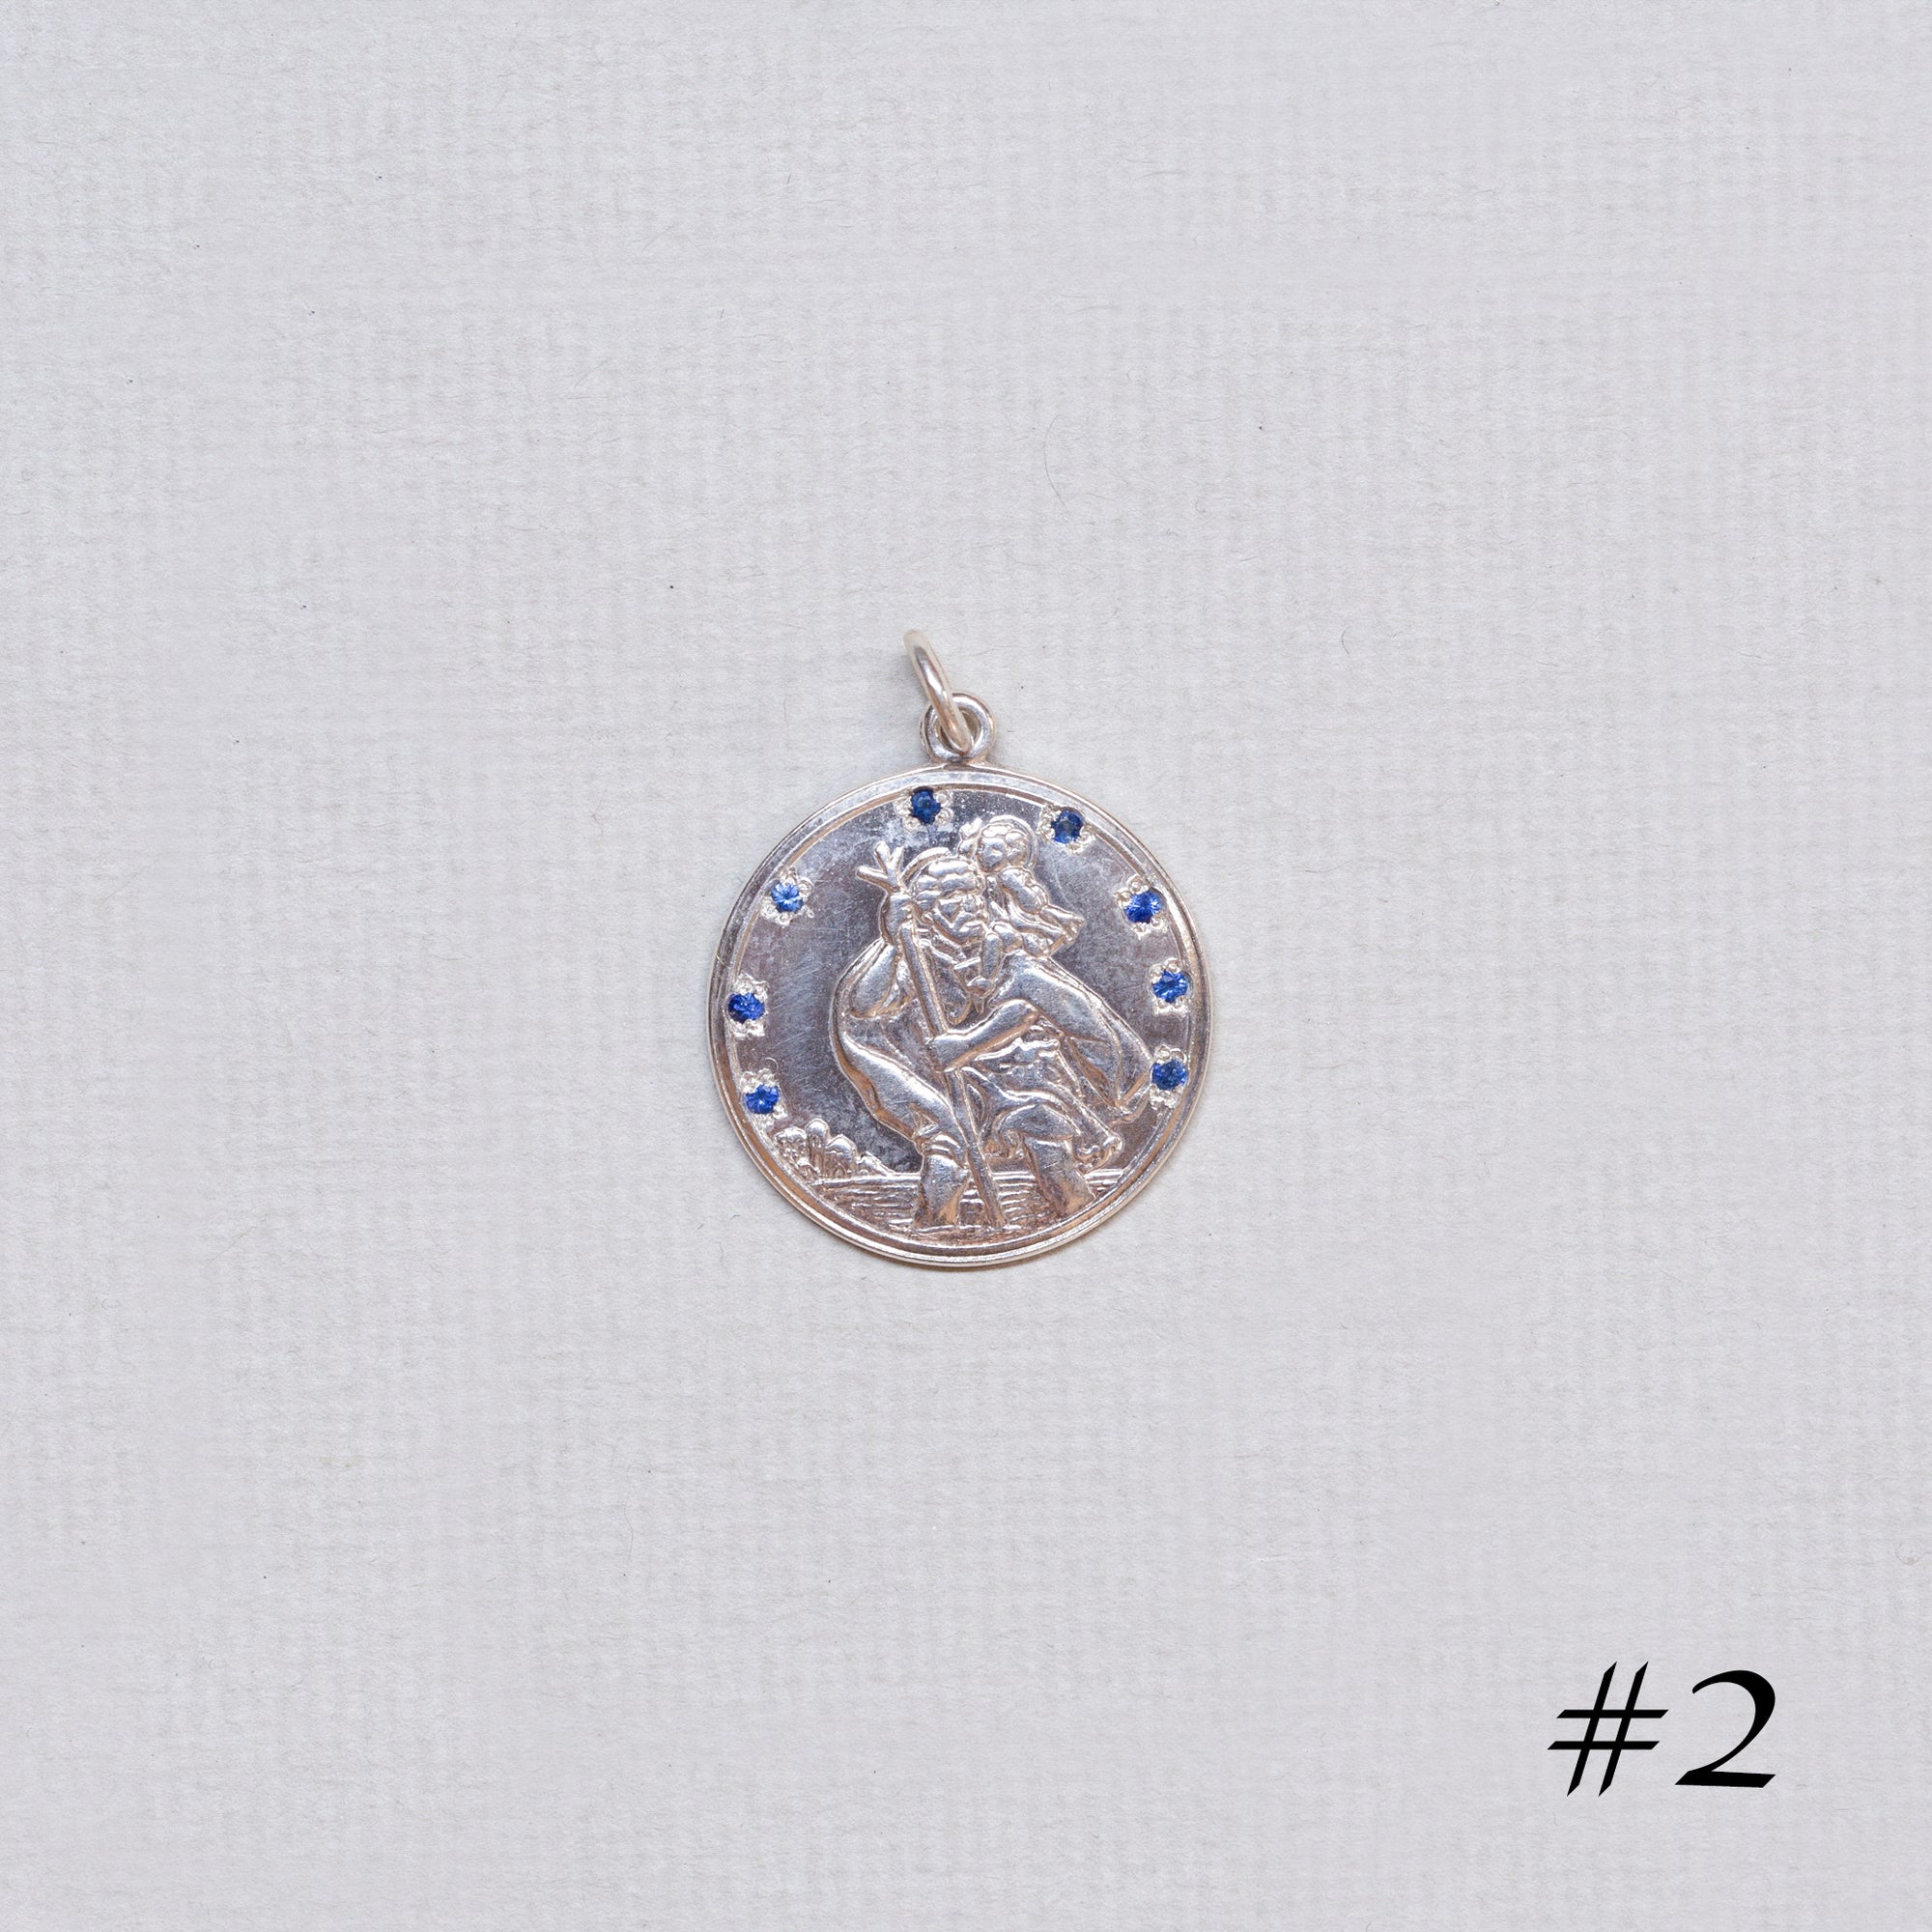 Vintage Silver St. Christopher Charm Pendant with Sapphires #2